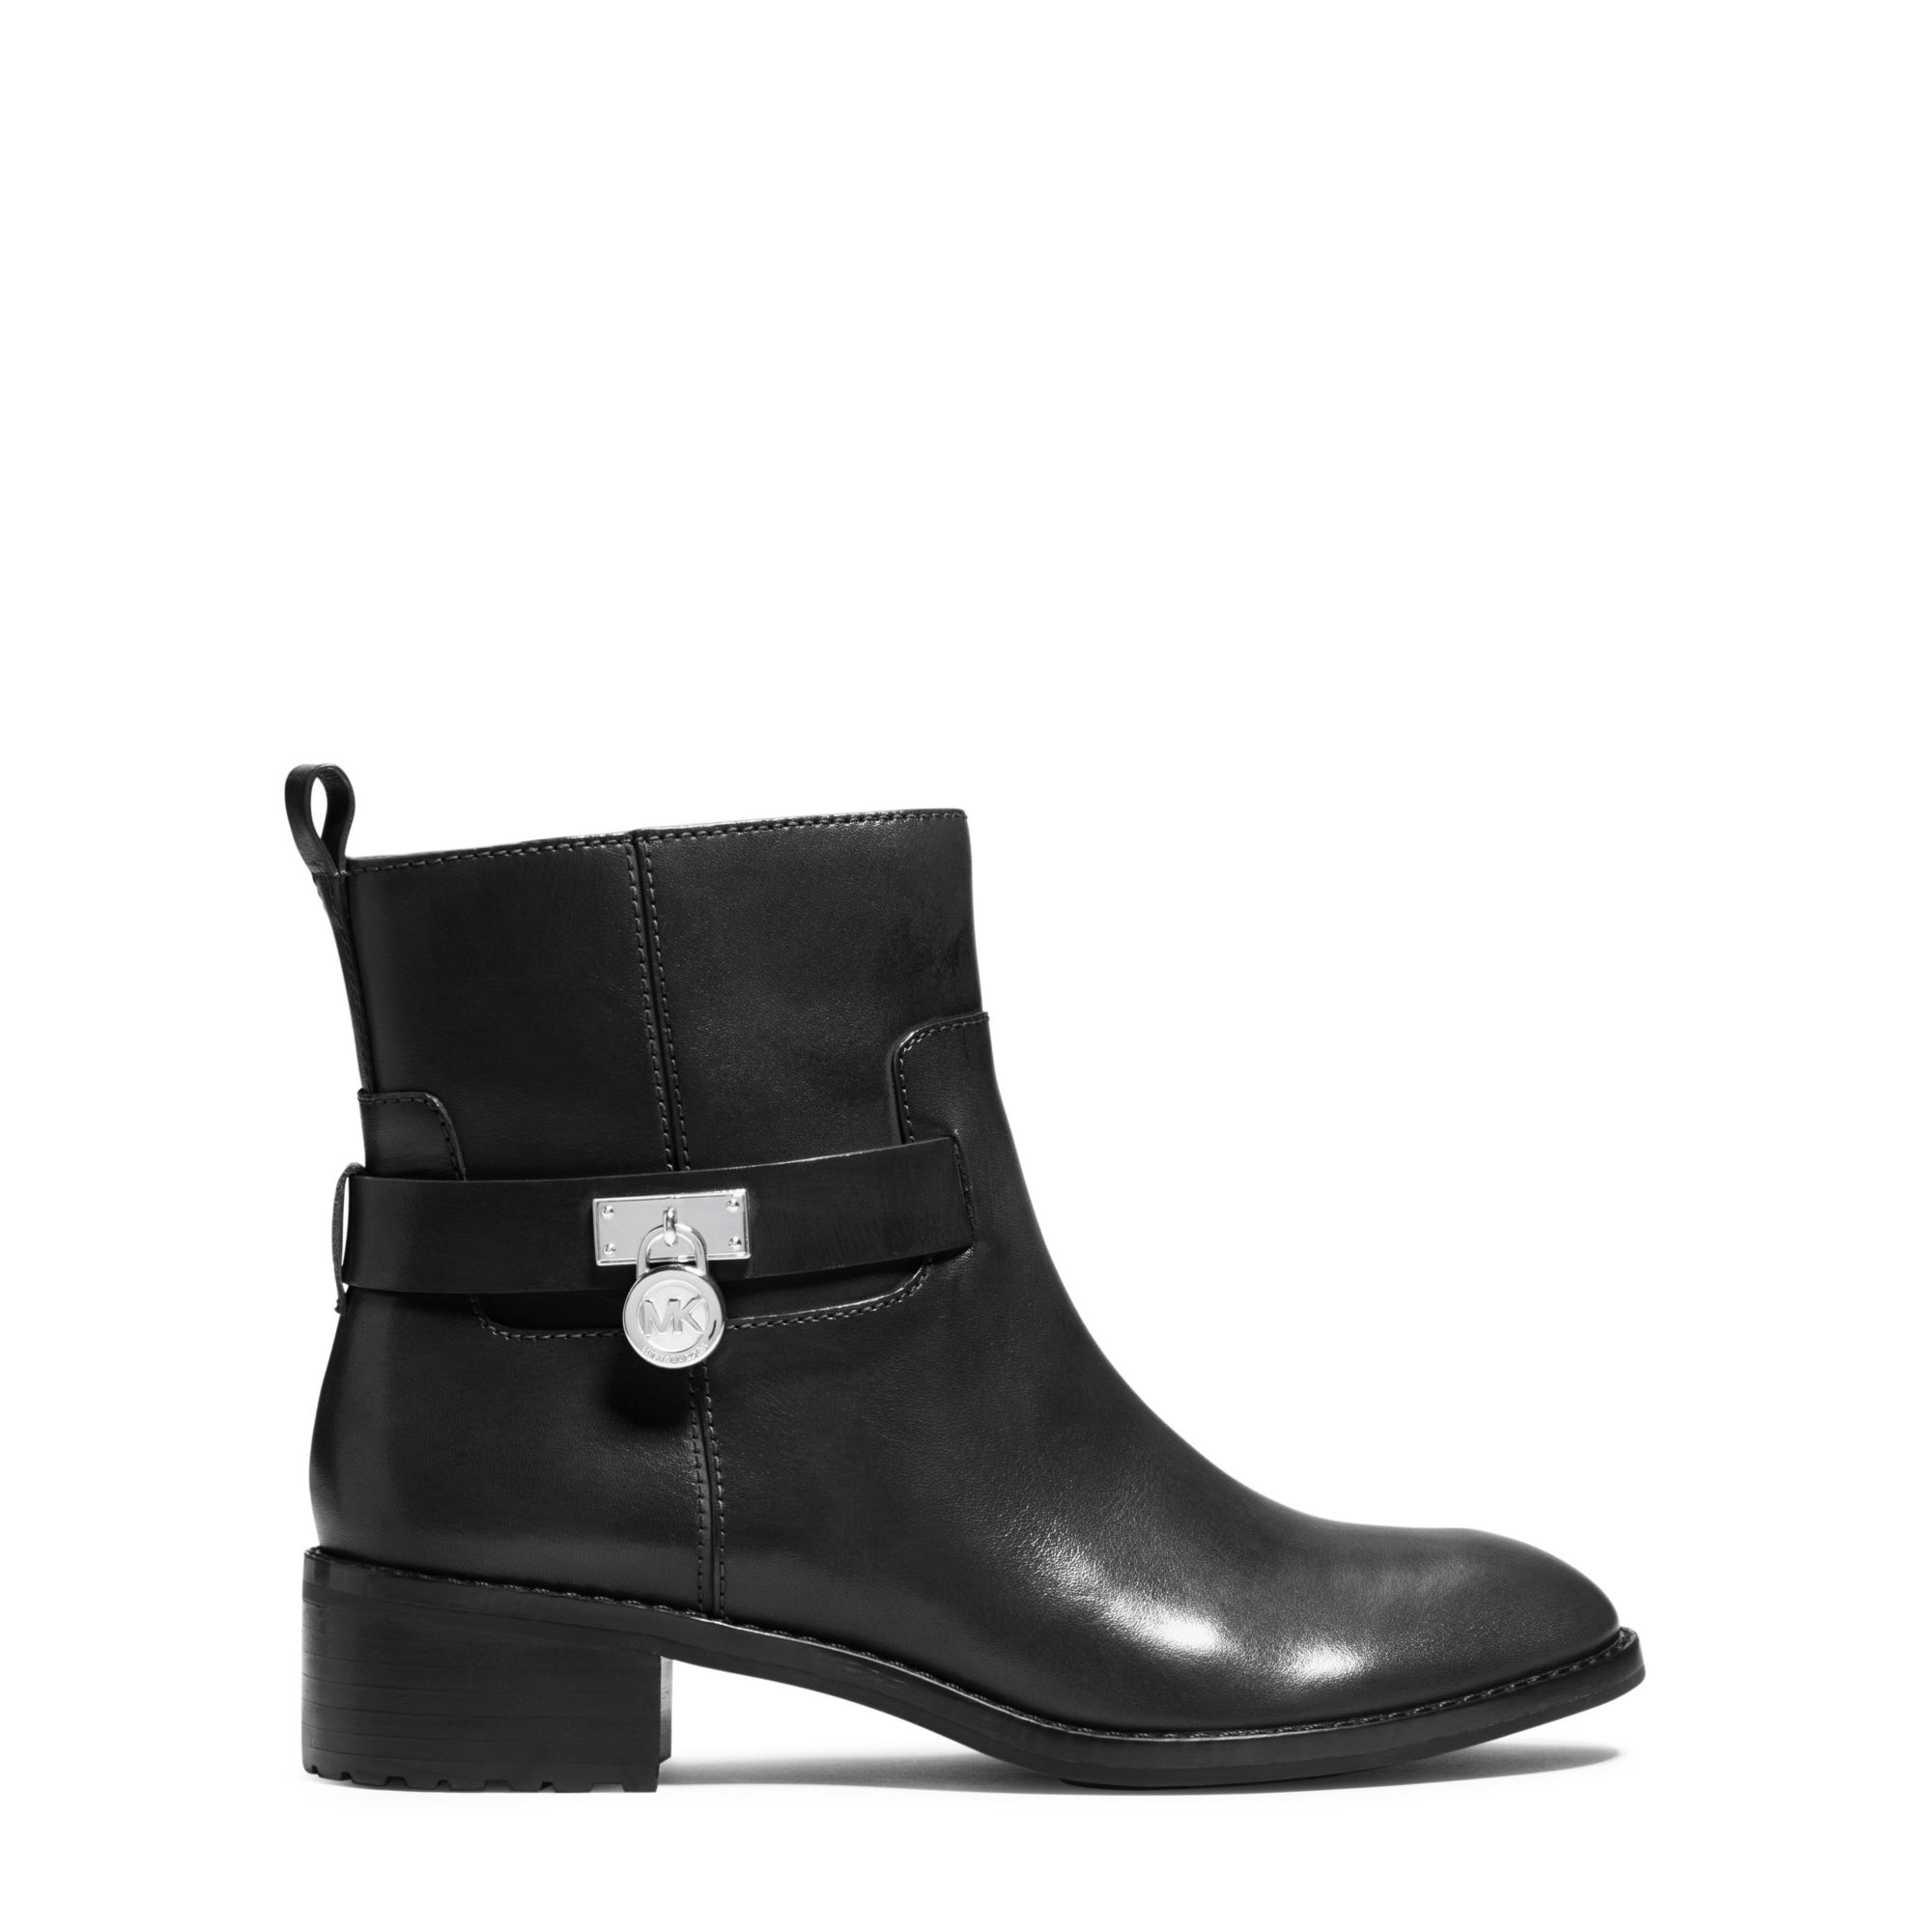 Michael kors Ryan Leather Ankle Boot in Black | Lyst